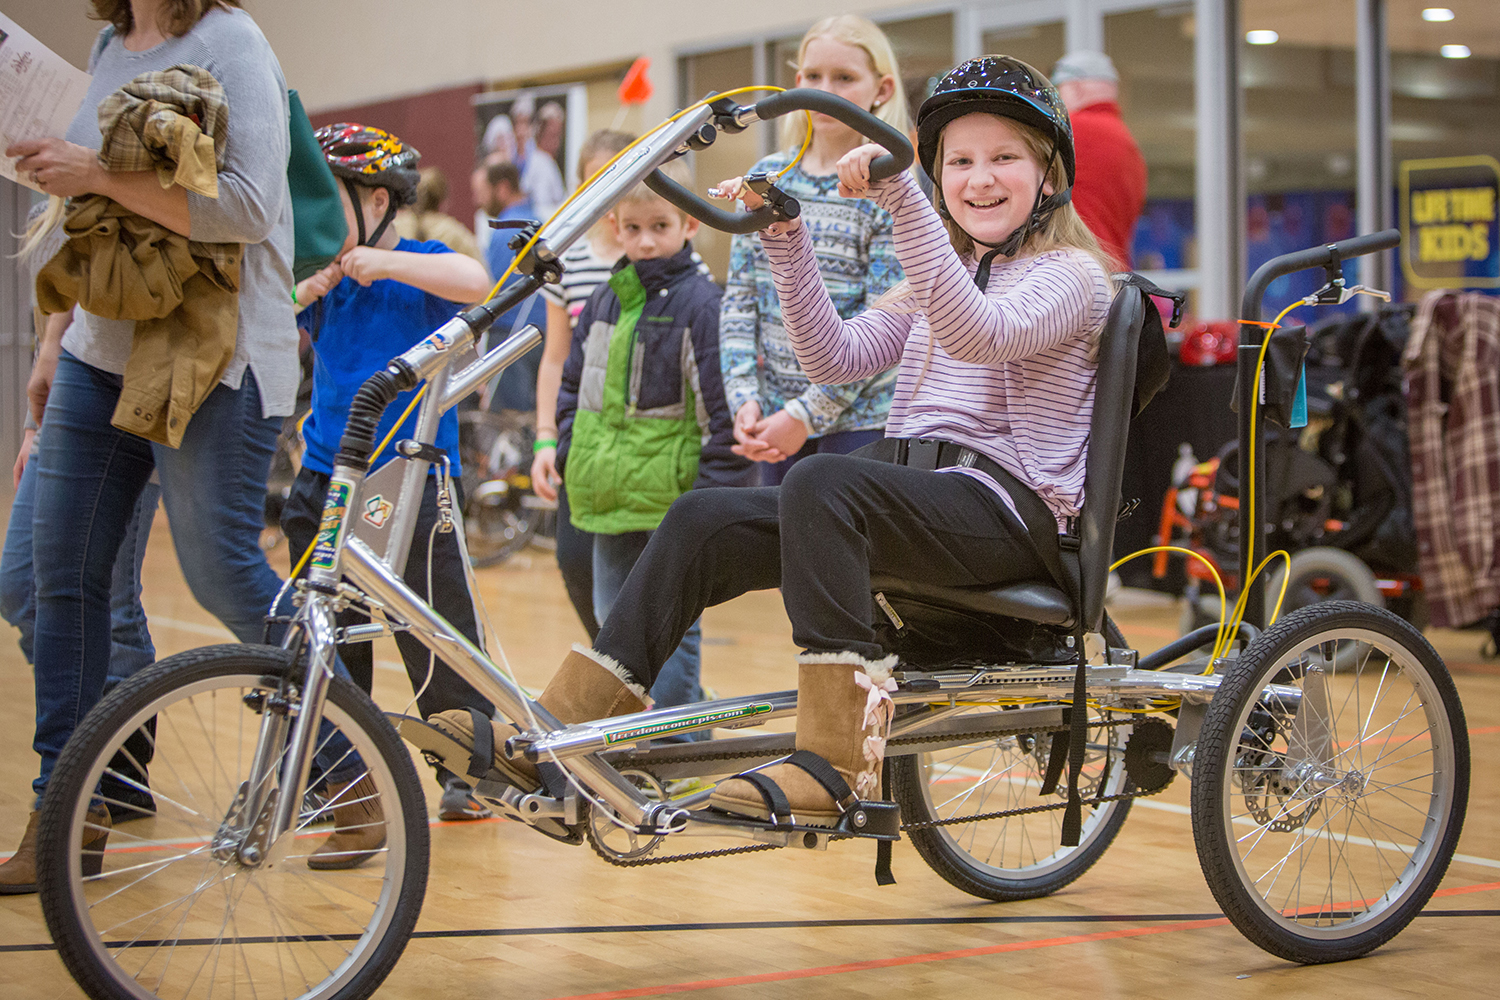 Kiara tries her first adapted bike at the expo.